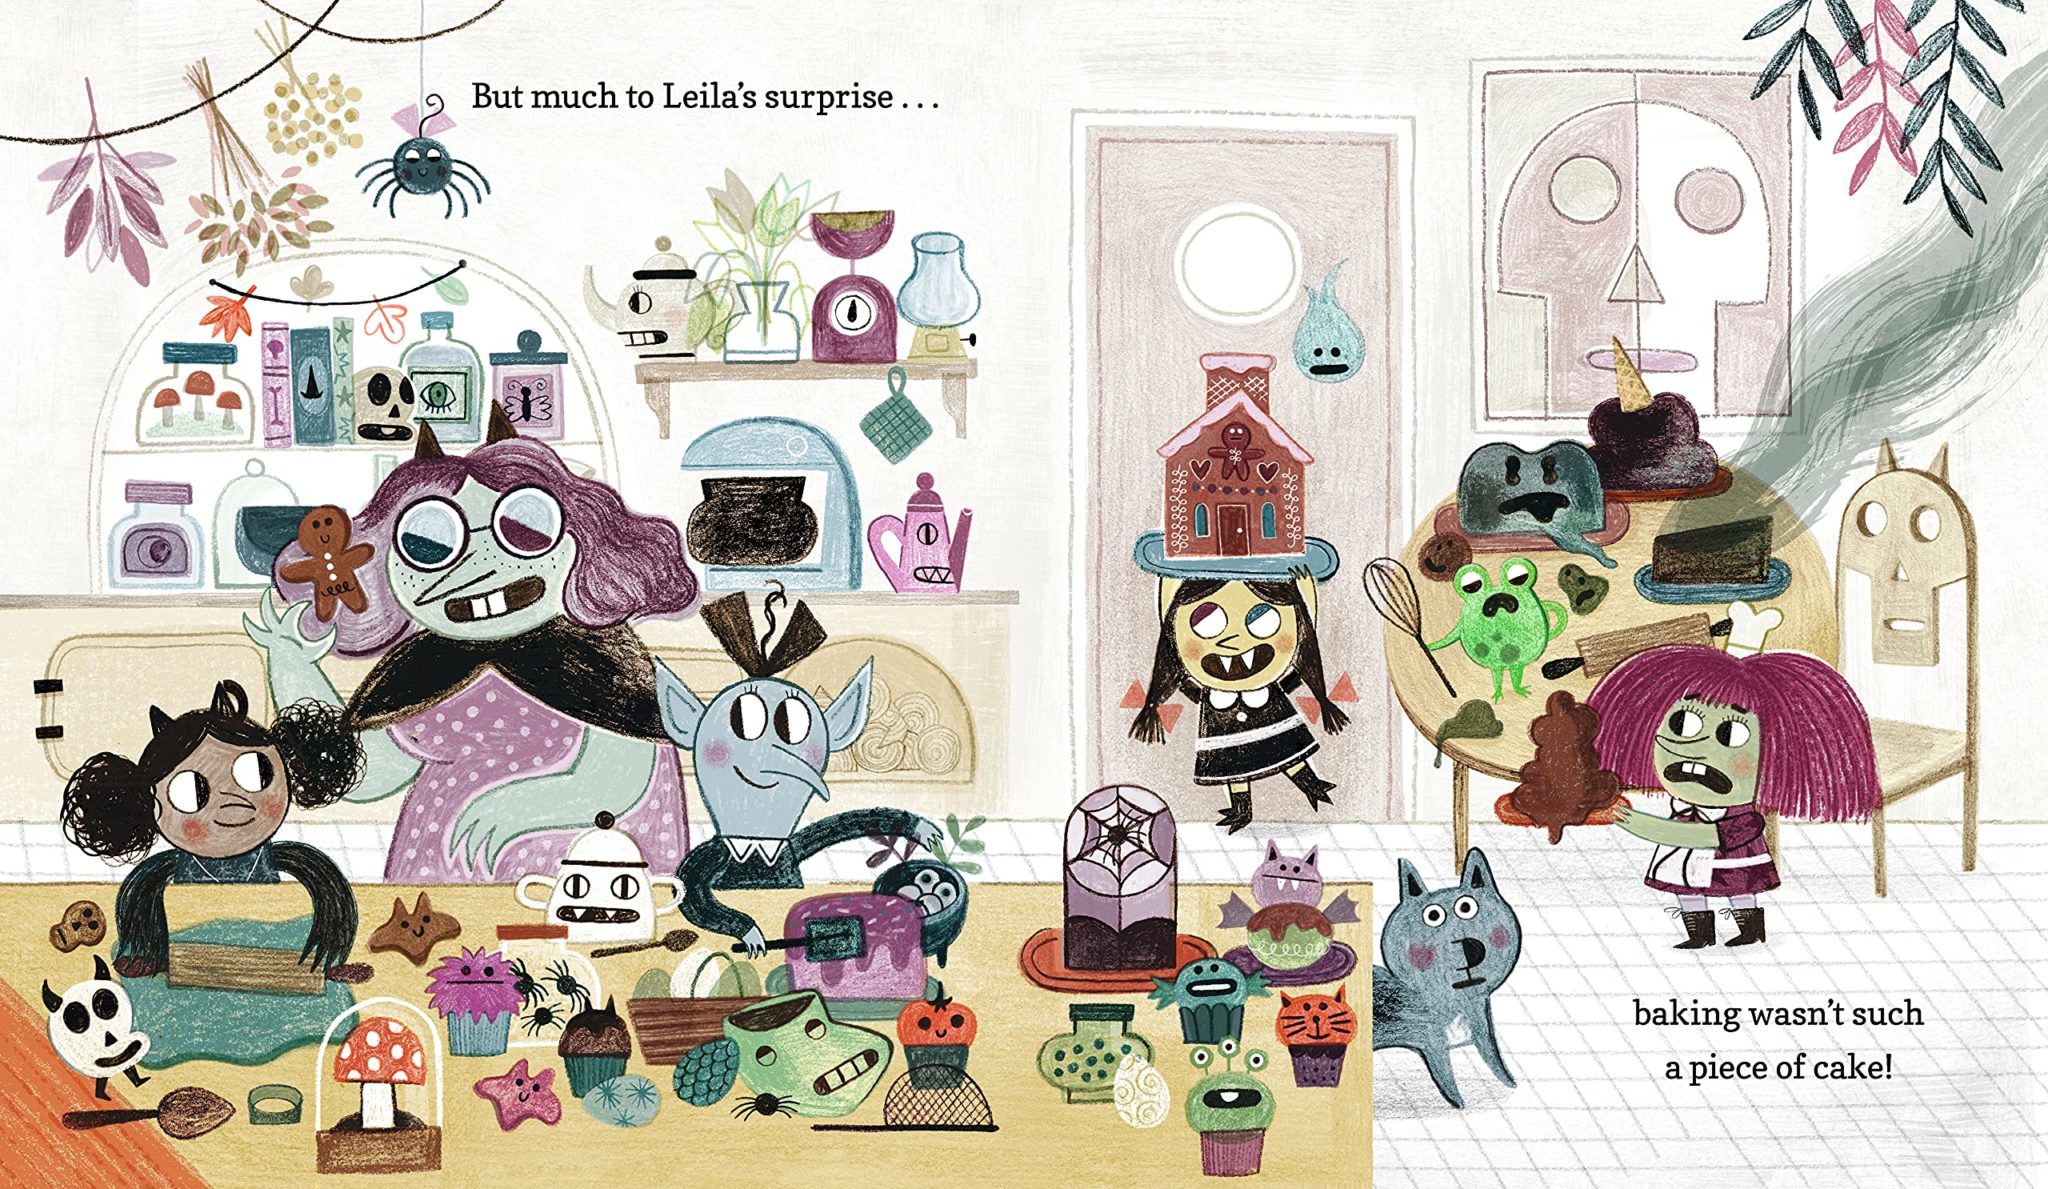 An excerpt from Leila, the Perfect Witch by Flavia Z. Drago. Leila and her family bake spooky treats in the kitchen together.